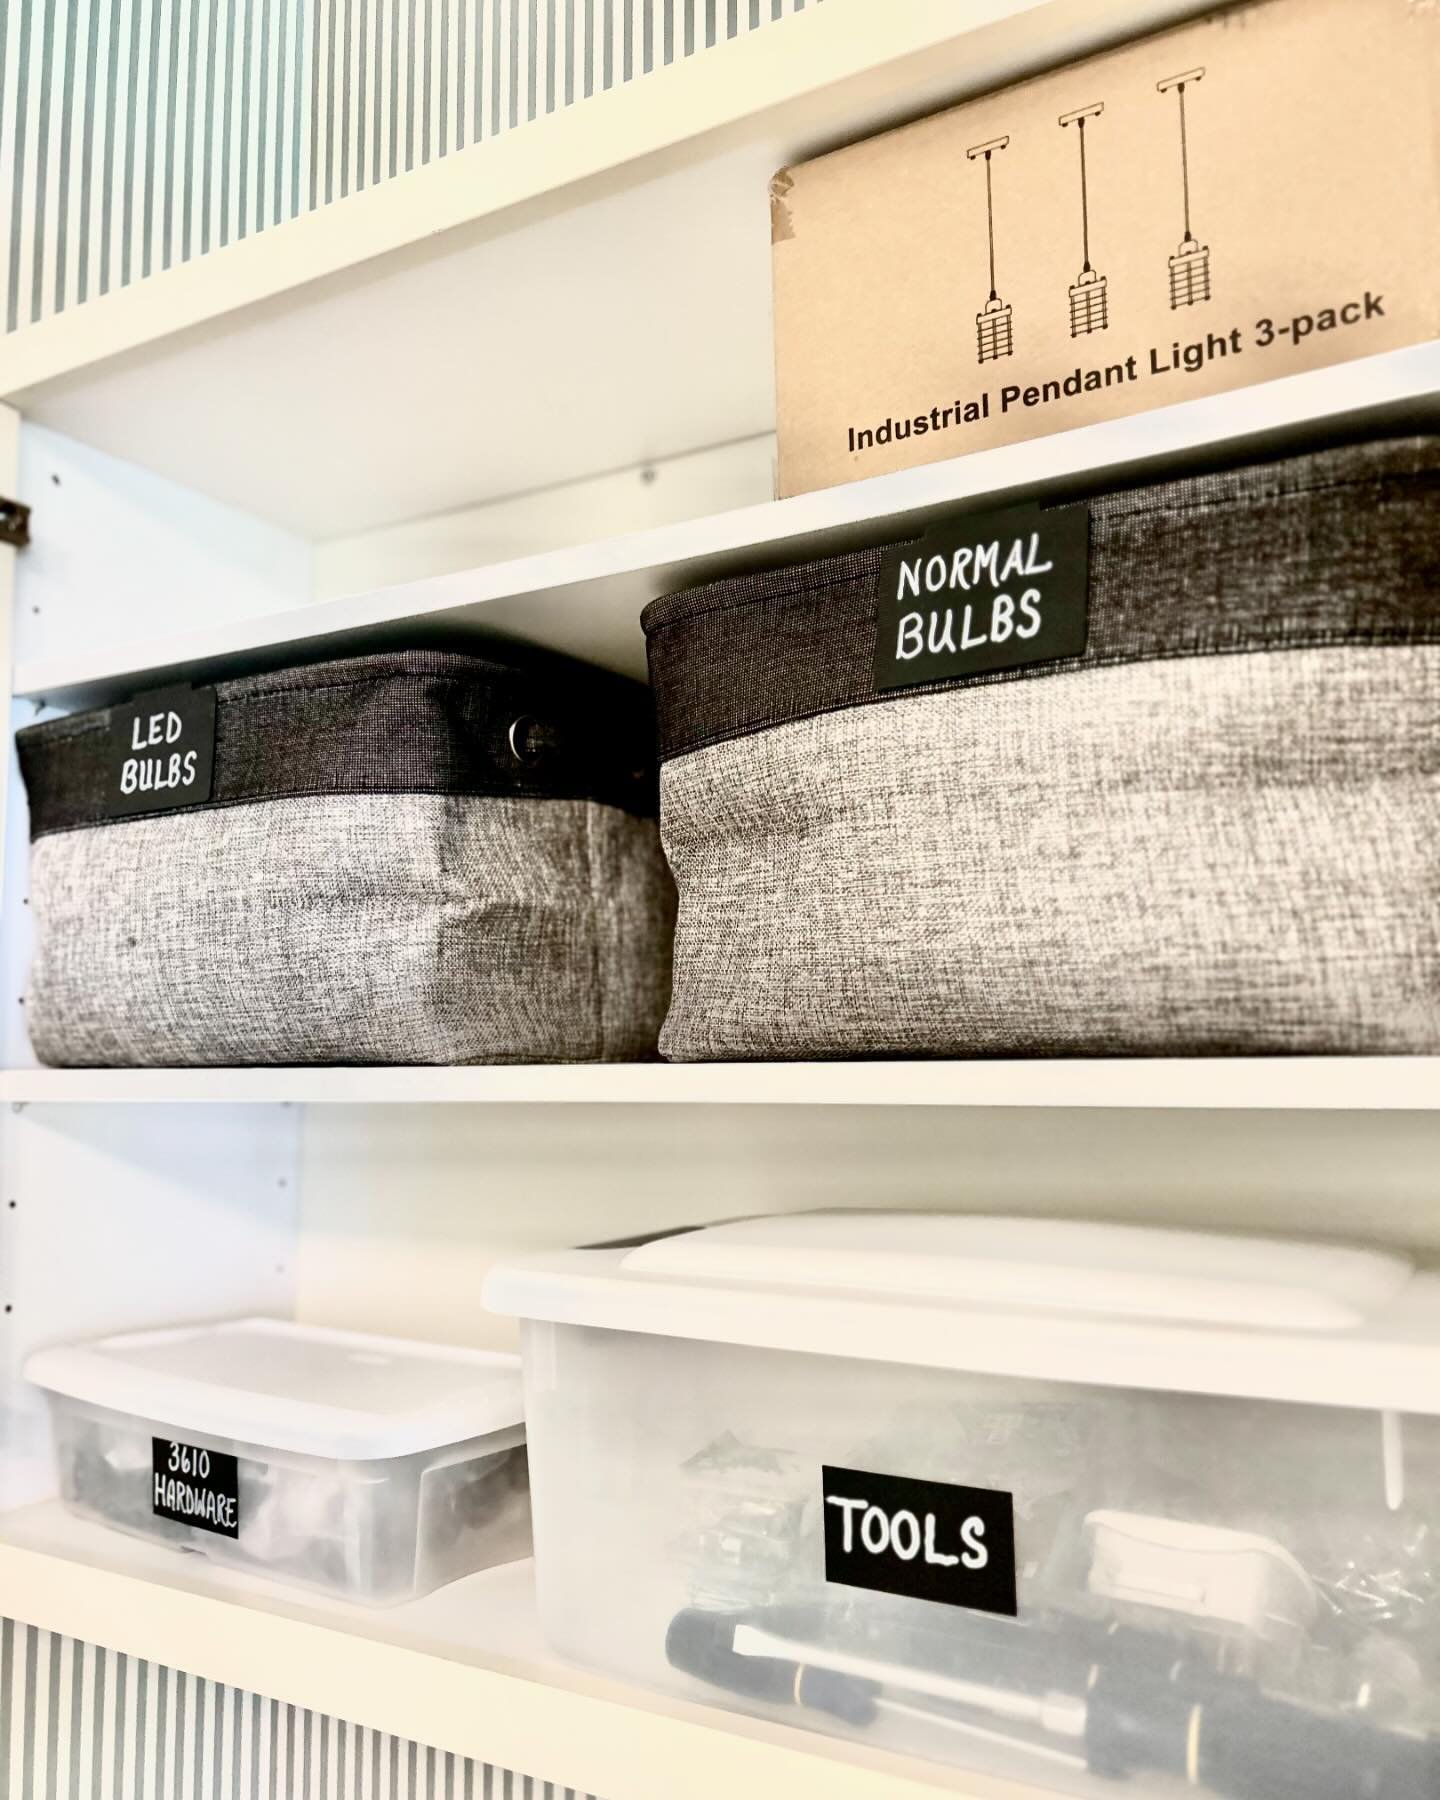 Wednesday Work AFTER⚜️
(Swipe twice for the BEFORE)

One session and we were able to create clean, open, counter spaces for managing laundry.

Our strategies for success:
1. Clear boundaries for editing
2. Repurposing existing containers 
3. Creating